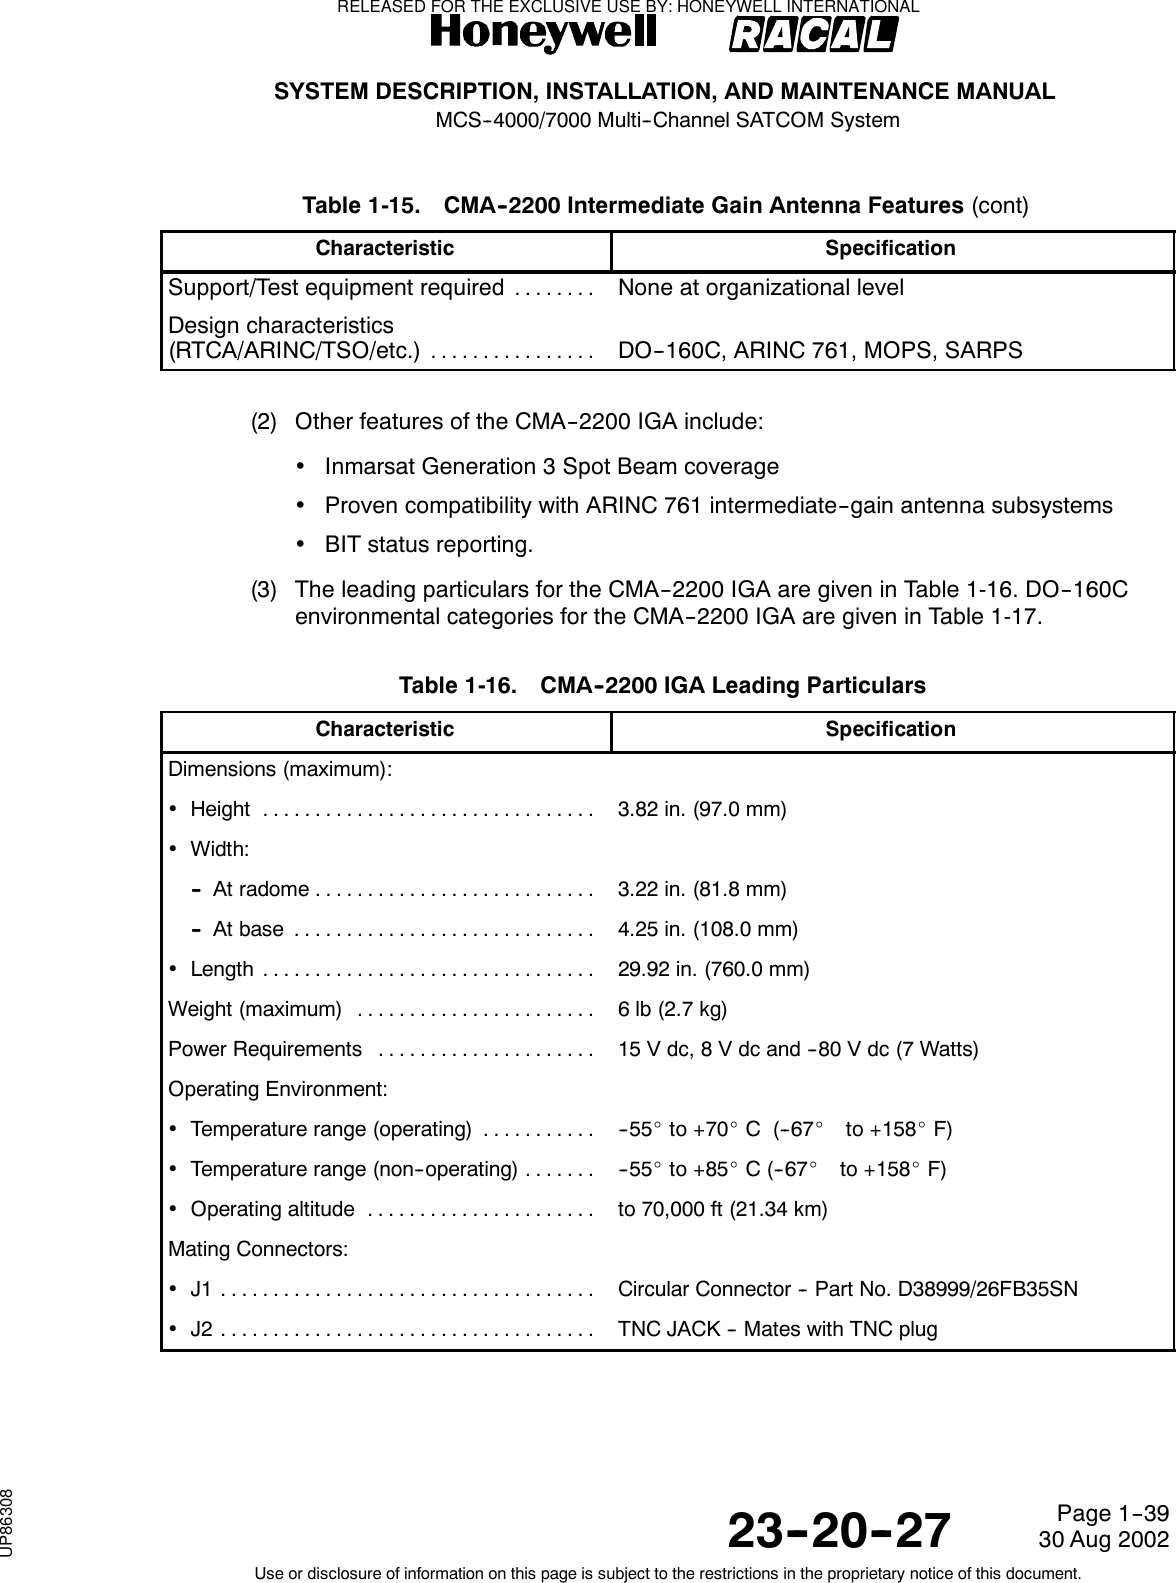 SYSTEM DESCRIPTION, INSTALLATION, AND MAINTENANCE MANUALMCS--4000/7000 Multi--Channel SATCOM System23--20--2730 Aug 2002Use or disclosure of information on this page is subject to the restrictions in the proprietary notice of this document.Page 1--39Table 1-15. CMA--2200 Intermediate Gain Antenna Features (cont)Characteristic SpecificationSupport/Test equipment required........None at organizational levelDesign characteristics(RTCA/ARINC/TSO/etc.)................DO--160C, ARINC 761, MOPS, SARPS(2) Other features of the CMA--2200 IGA include:•Inmarsat Generation 3 Spot Beam coverage•Proven compatibility with ARINC 761 intermediate--gain antenna subsystems•BIT status reporting.(3) The leading particulars for the CMA--2200 IGA are given in Table 1-16. DO--160Cenvironmental categories for the CMA--2200 IGA are given in Table 1-17.Table 1-16. CMA--2200 IGA Leading ParticularsCharacteristic SpecificationDimensions (maximum):•Height ................................ 3.82 in. (97.0 mm)•Width:-- At radome ........................... 3.22 in. (81.8 mm)-- Atbase ............................. 4.25 in. (108.0 mm)•Length ................................ 29.92 in. (760.0 mm)Weight (maximum) ....................... 6lb(2.7kg)Power Requirements ..................... 15 V dc, 8 V dc and --80 V dc (7 Watts)Operating Environment:•Temperature range (operating) ........... -- 5 5 _to +70_C(--67_to +158_F)•Temperature range (non--operating) ....... -- 5 5 _to +85_C(--67_to +158_F)•Operatingaltitude ...................... to 70,000 ft (21.34 km)Mating Connectors:•J1 .................................... Circular Connector -- Part No. D38999/26FB35SN•J2 .................................... TNC JACK -- Mates with TNC plugRELEASED FOR THE EXCLUSIVE USE BY: HONEYWELL INTERNATIONALUP86308